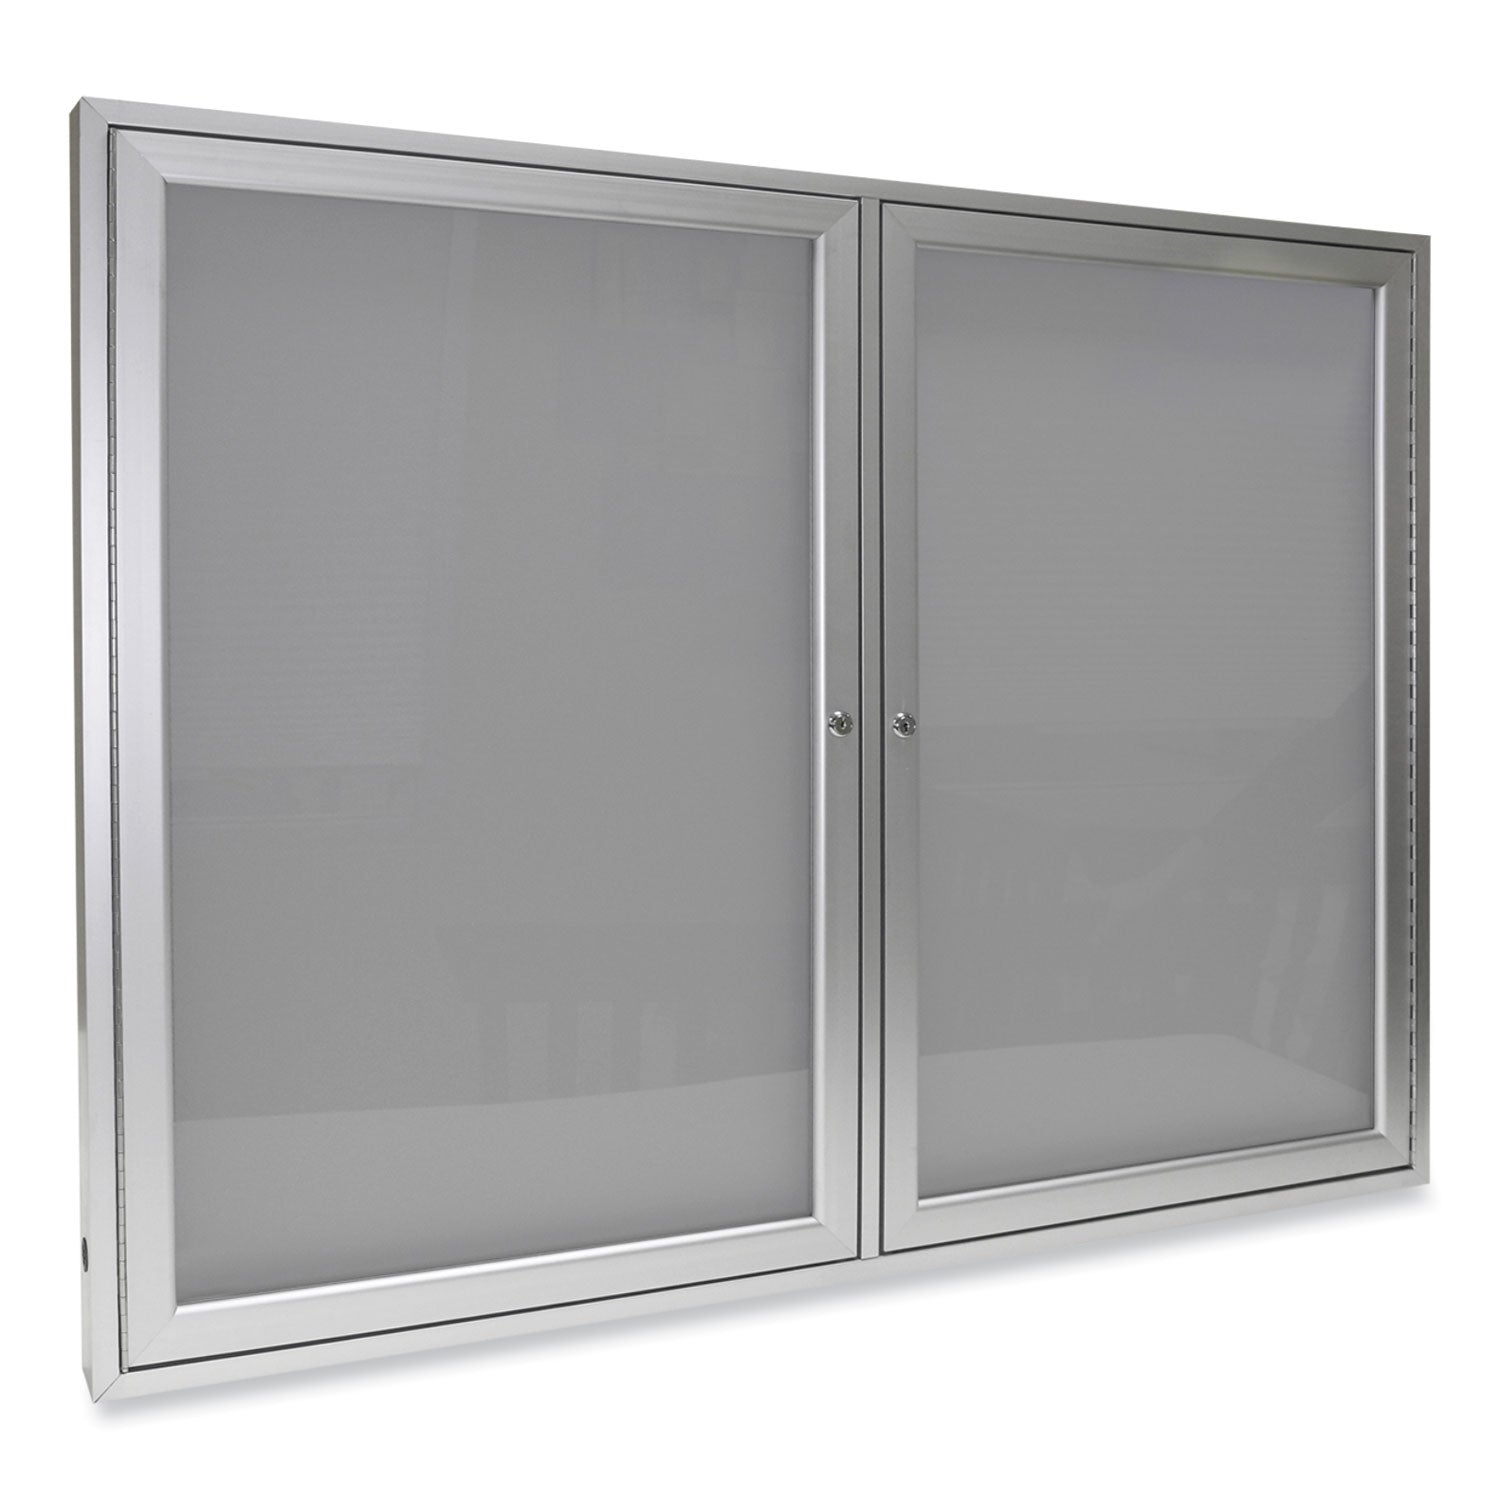 2-door-enclosed-vinyl-bulletin-board-with-satin-aluminum-frame-60-x-48-silver-surface-ships-in-7-10-business-days_ghepa24860vx193 - 1